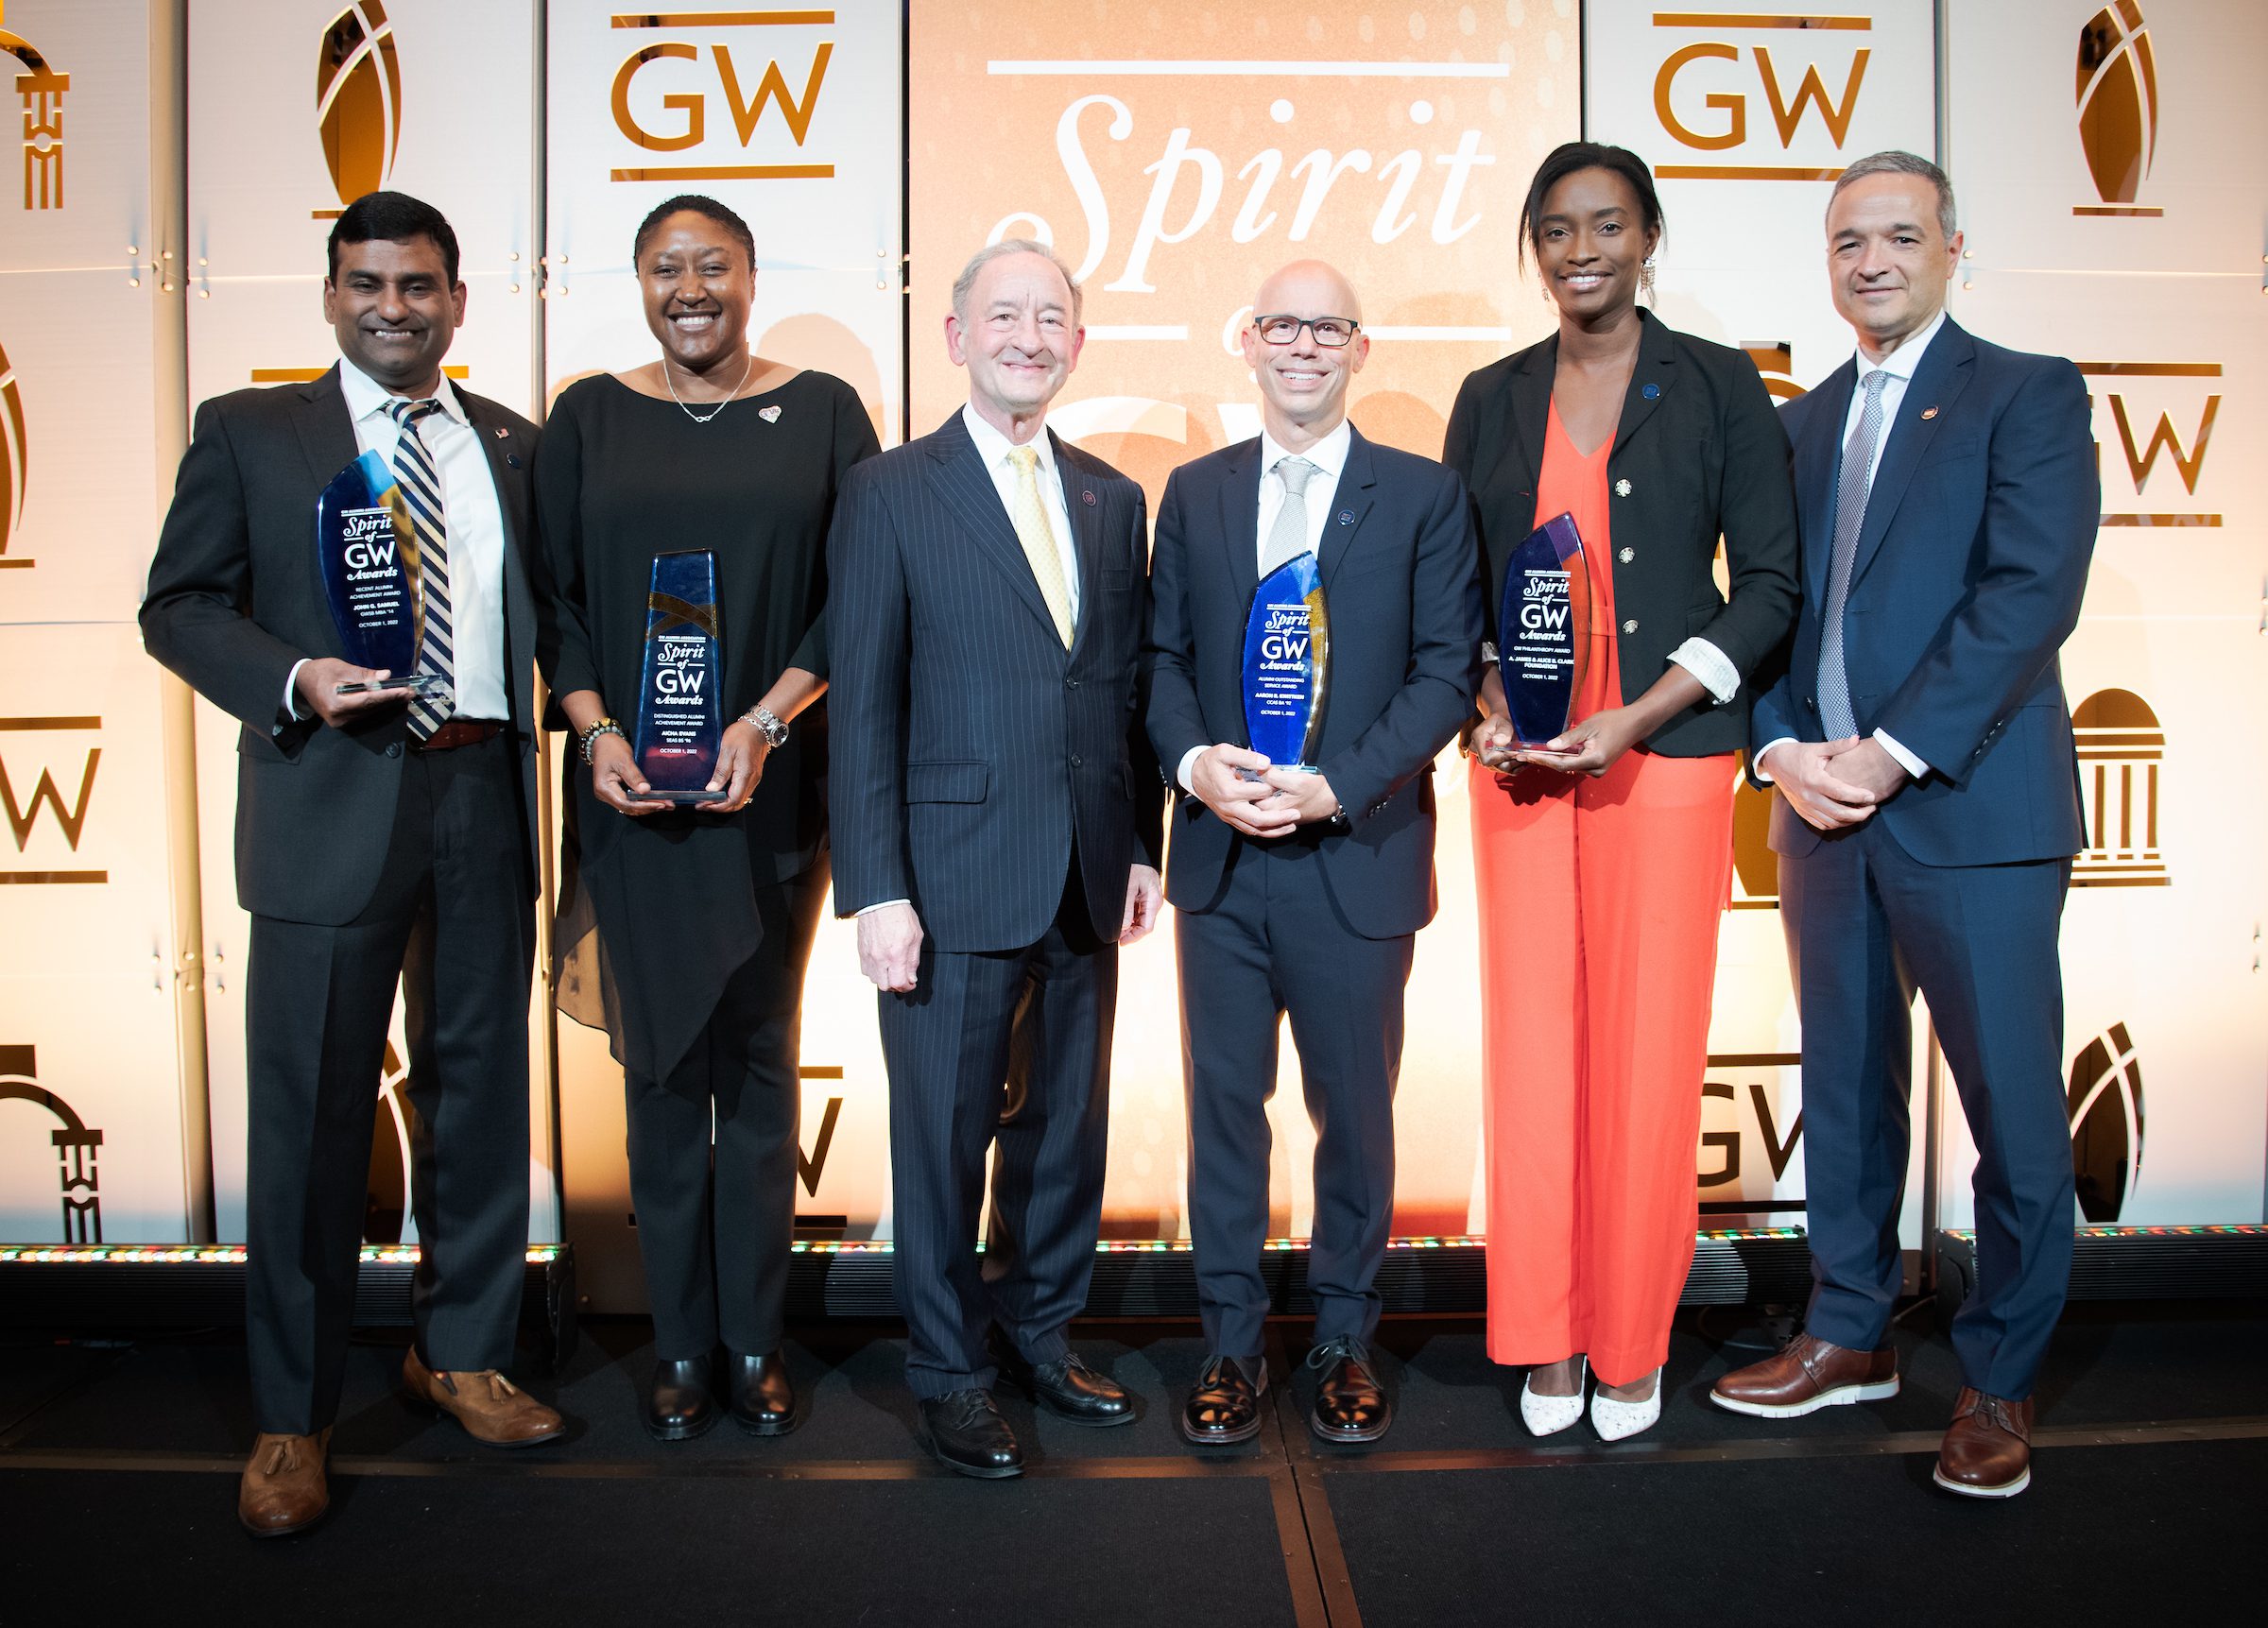 The Spirit of GW Awards Honors Alumni and a Foundation for Professional, Philanthropic and Volunteer Achievement.